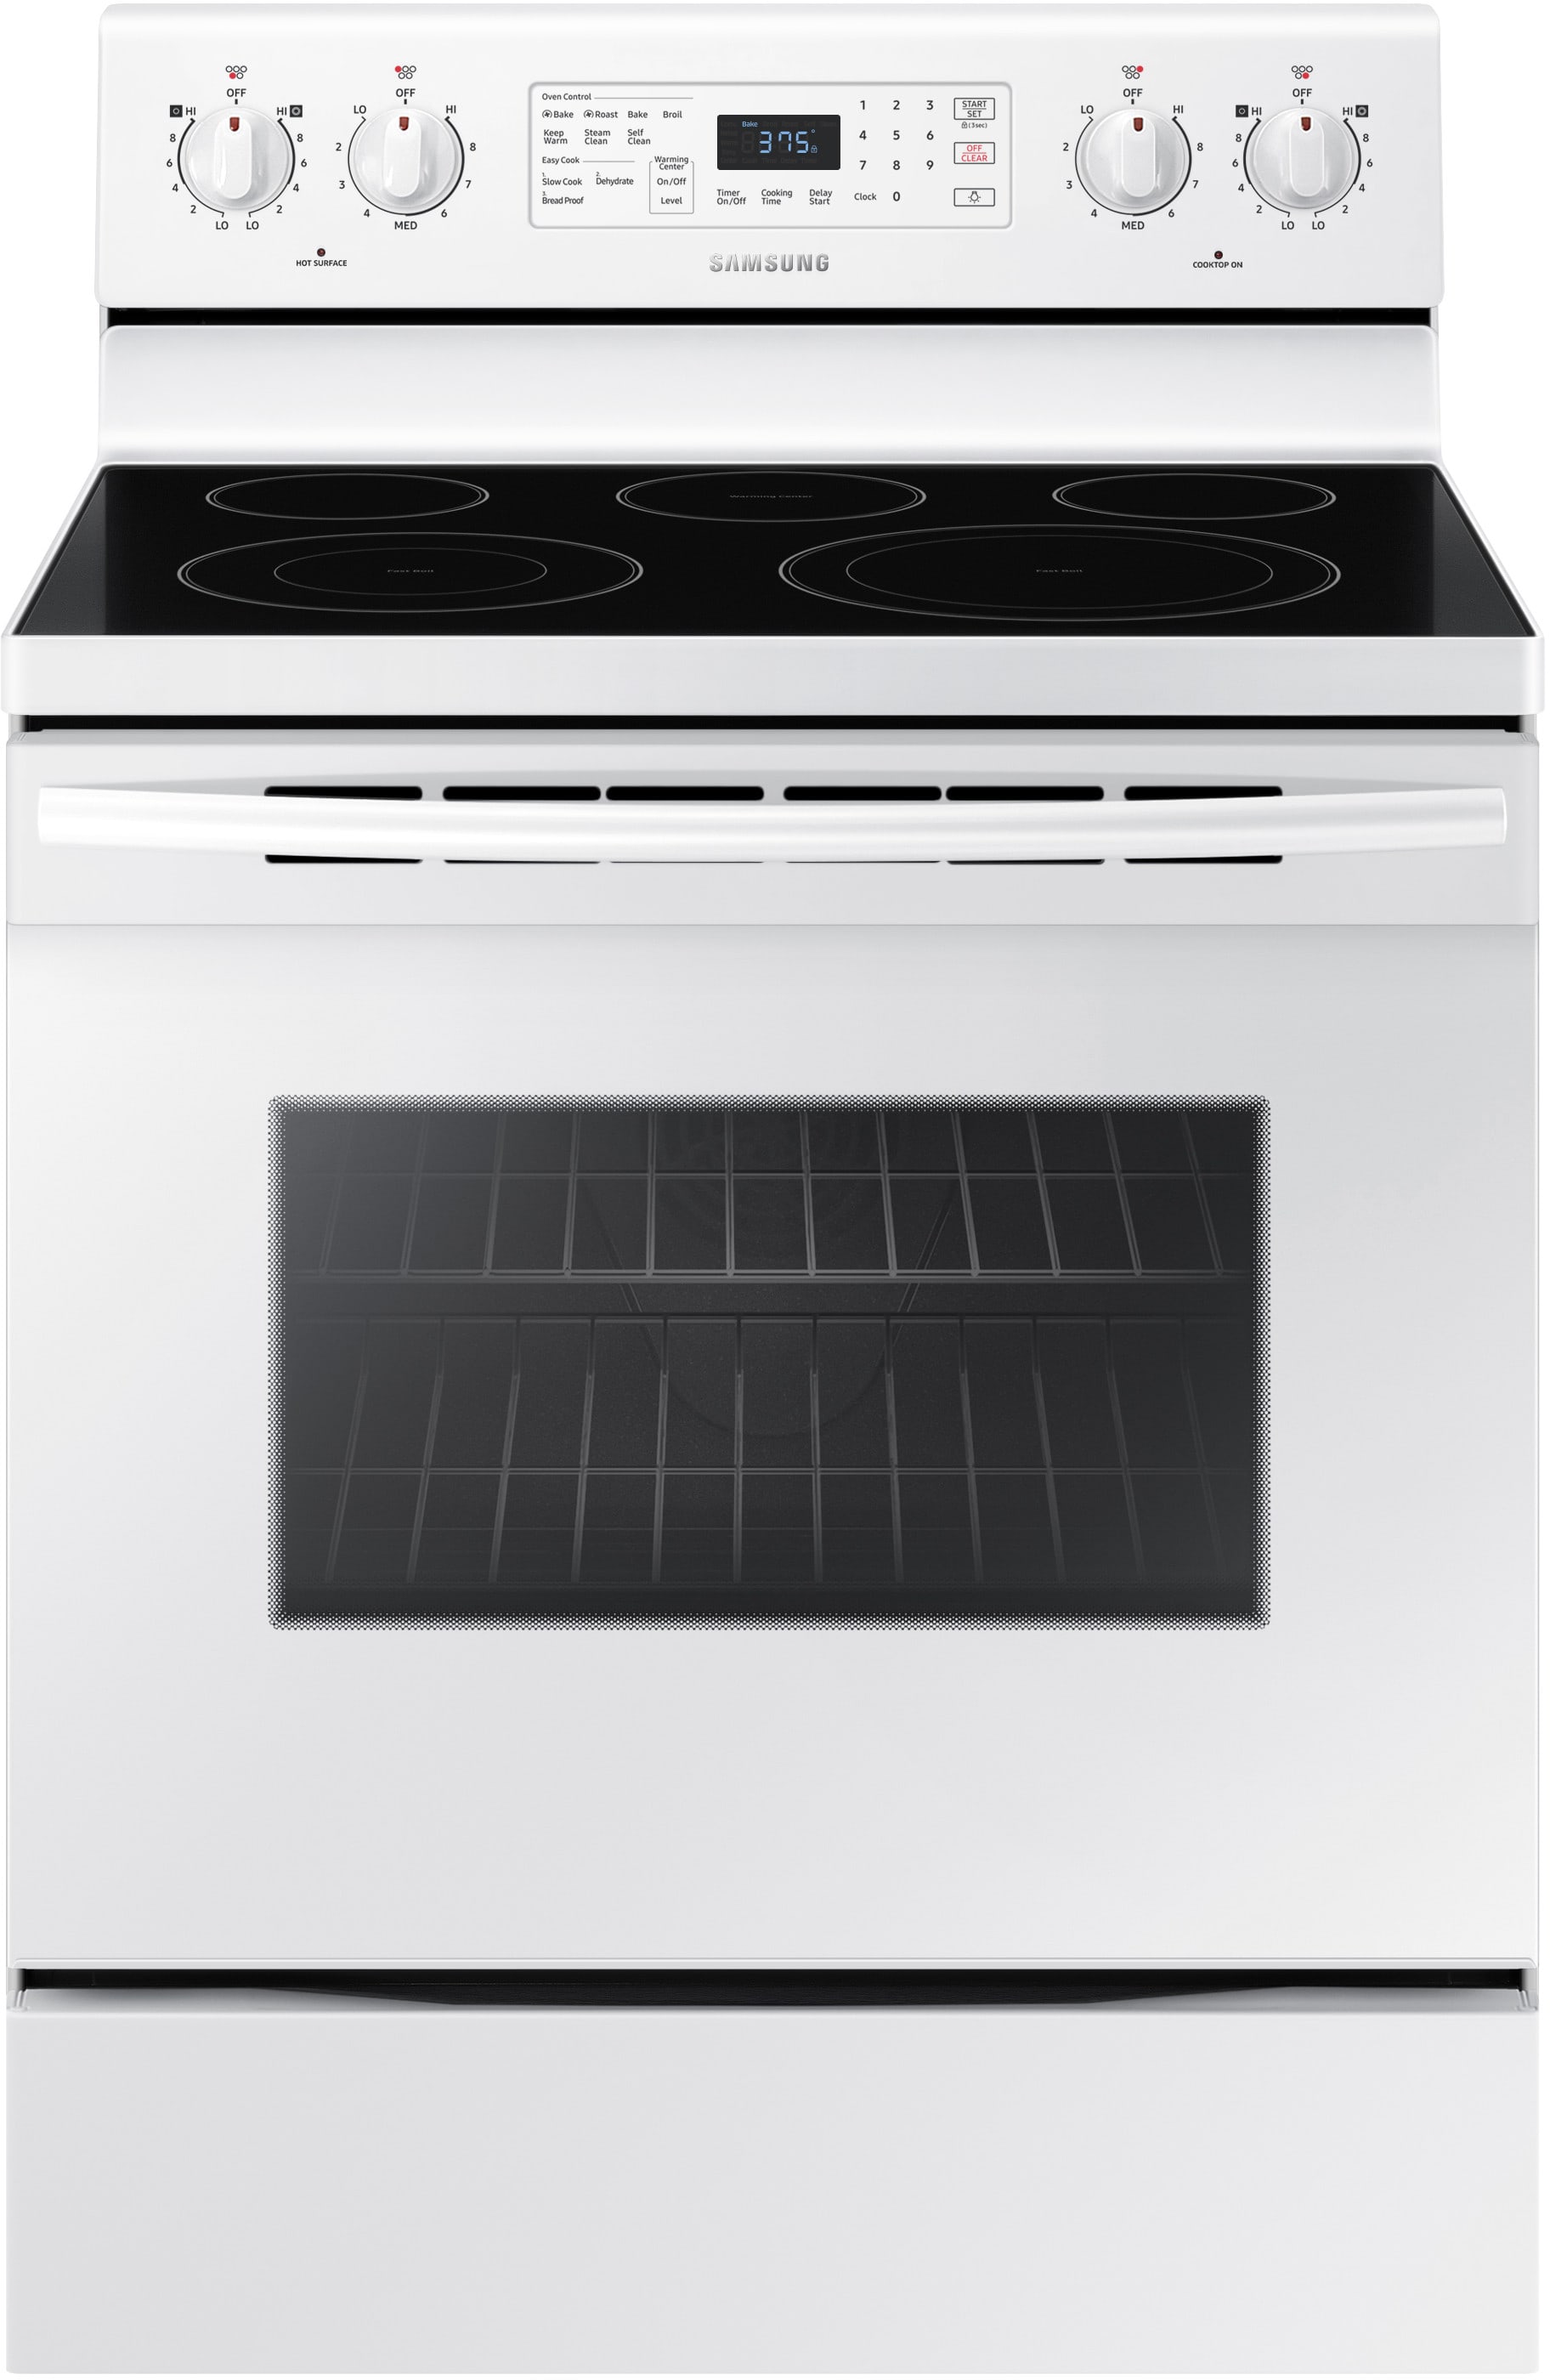 samsung-ne59m4320sw-30-inch-freestanding-electric-range-with-convection